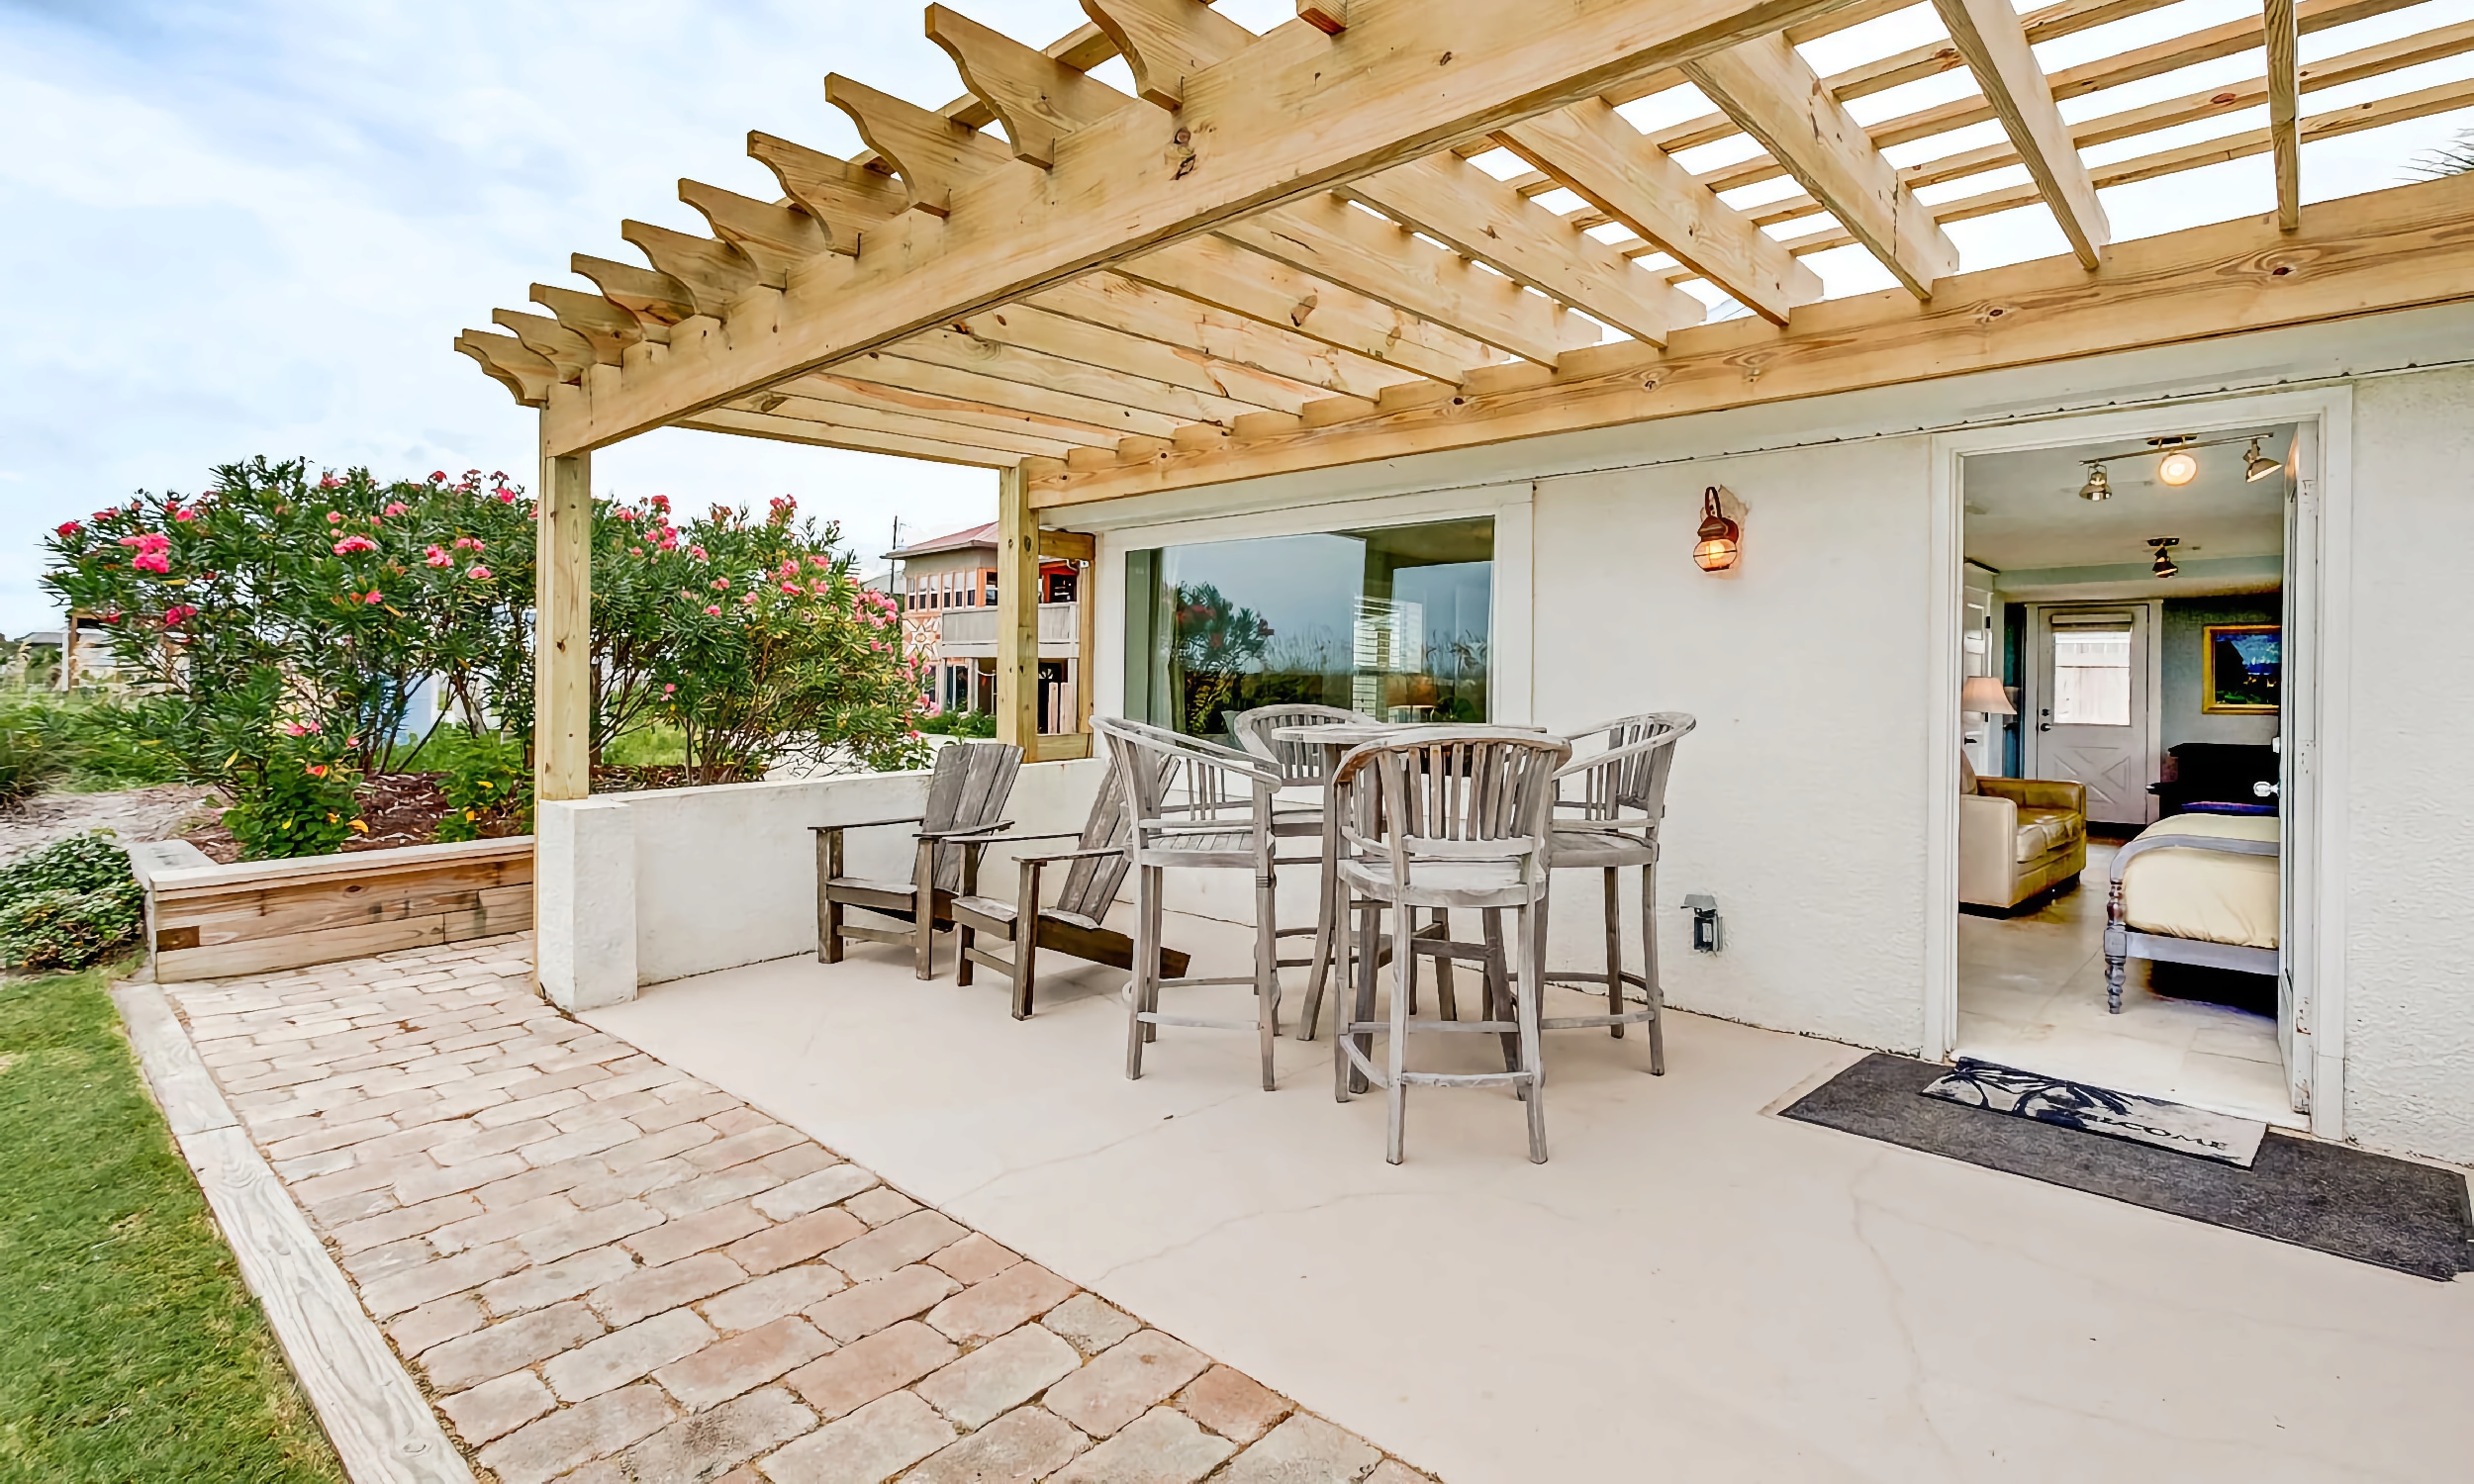 The patio deck, is covered with a wood pergola, and has multiple seating areas